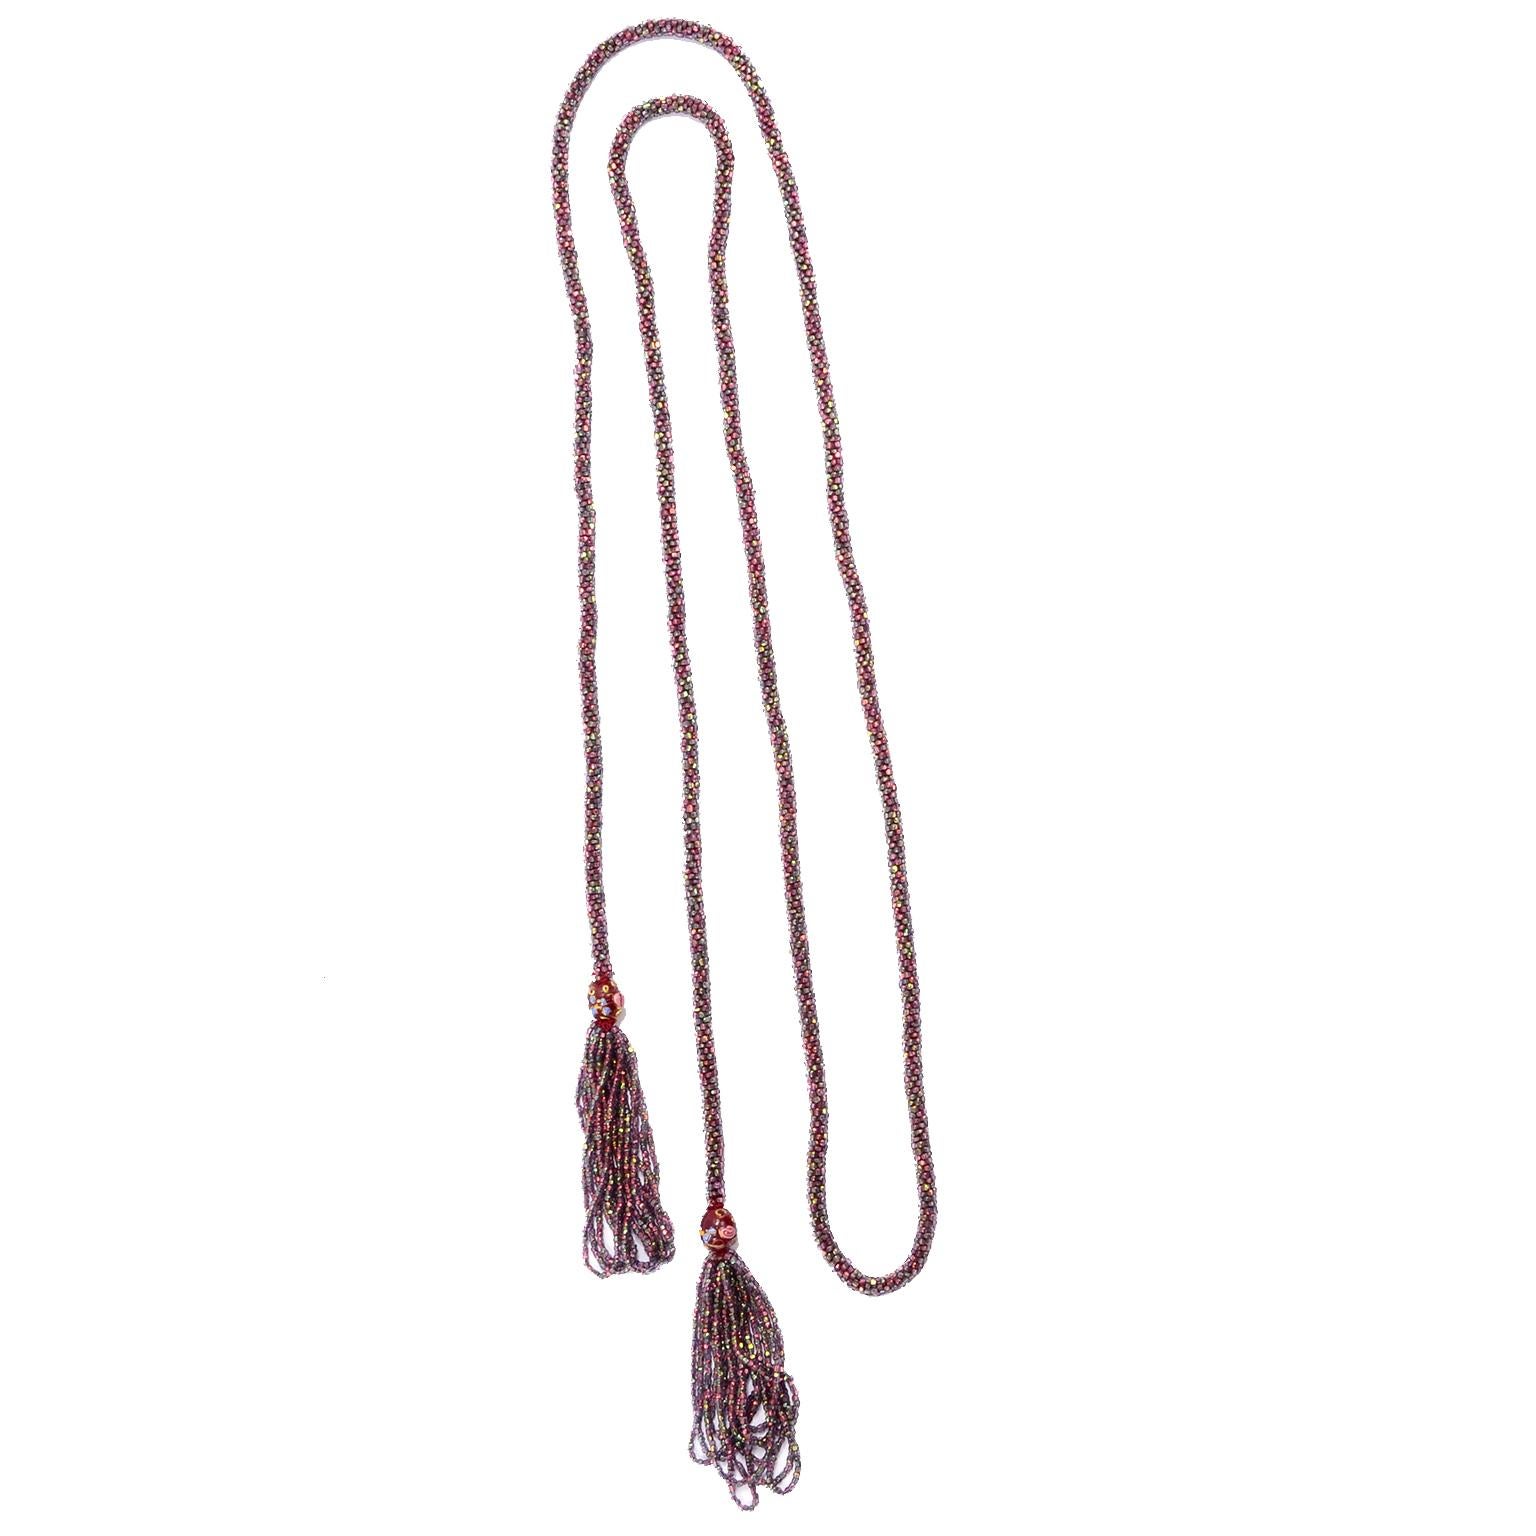 Vintage 1920s Sautoir Beaded Tassel Flapper Necklace W Lampwork Beads & Fringe In Excellent Condition For Sale In Portland, OR